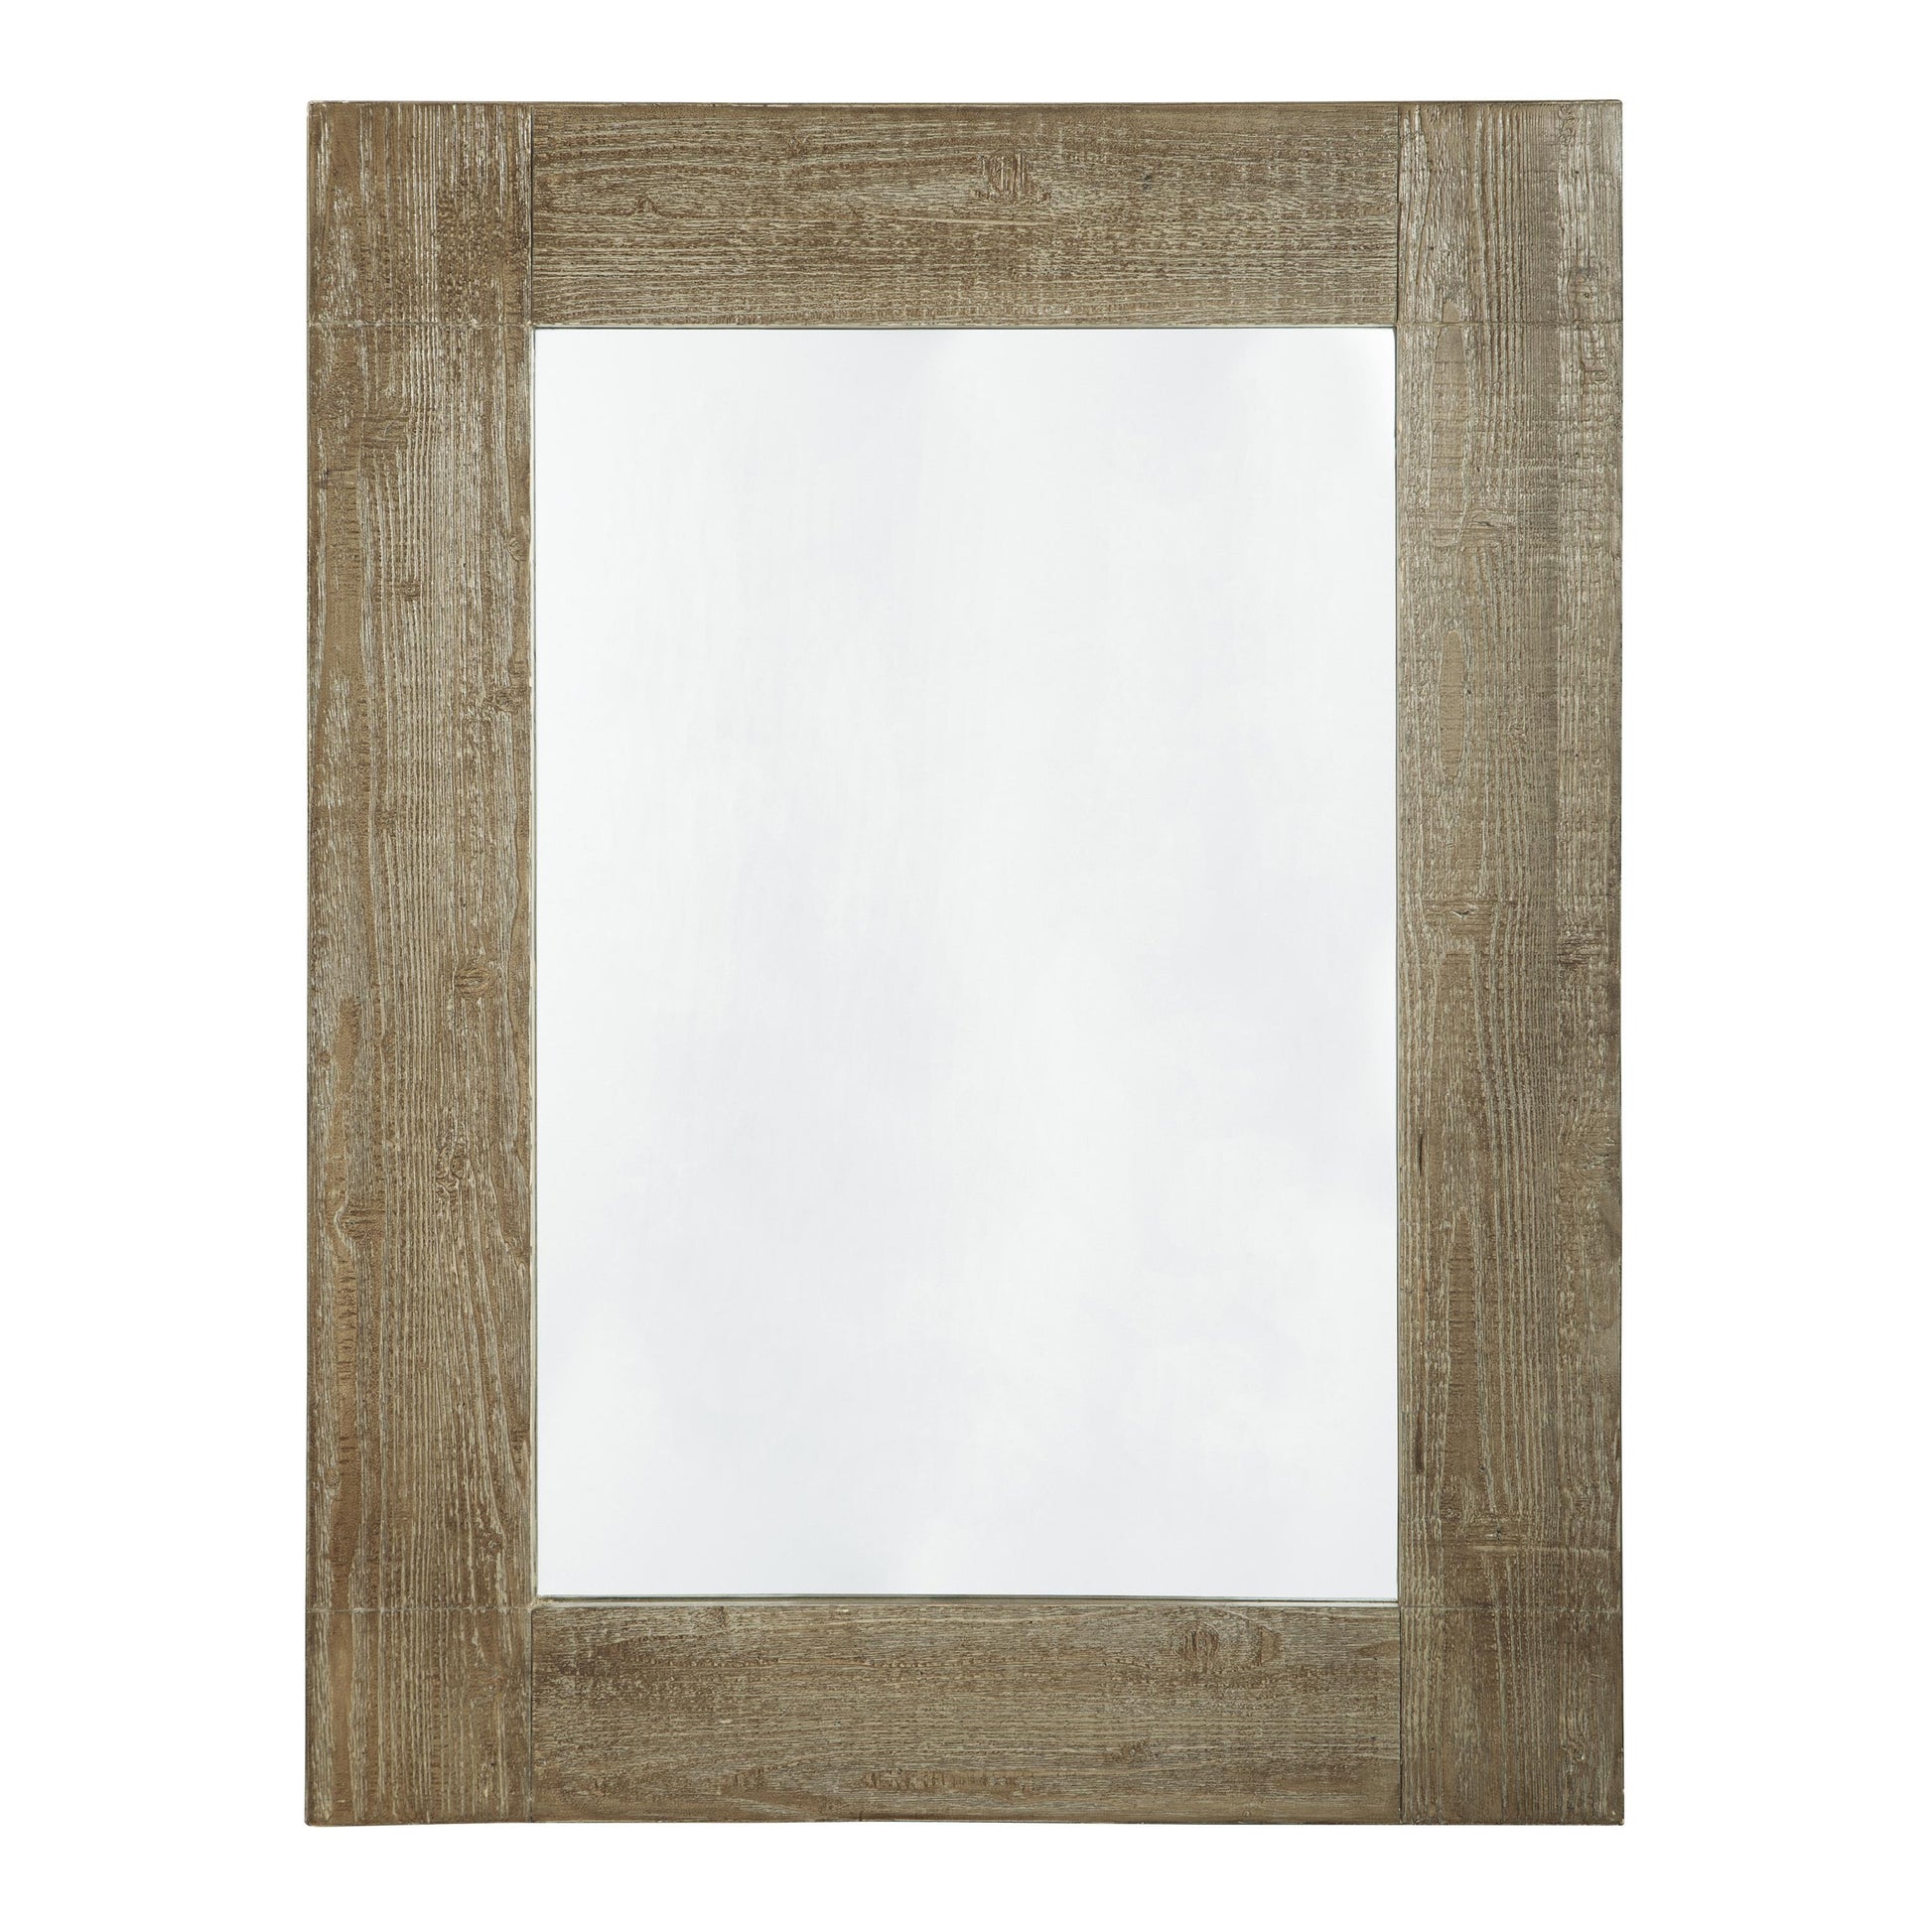 Signature Design by Ashley Waltleigh Wall Mirror A8010277 IMAGE 2